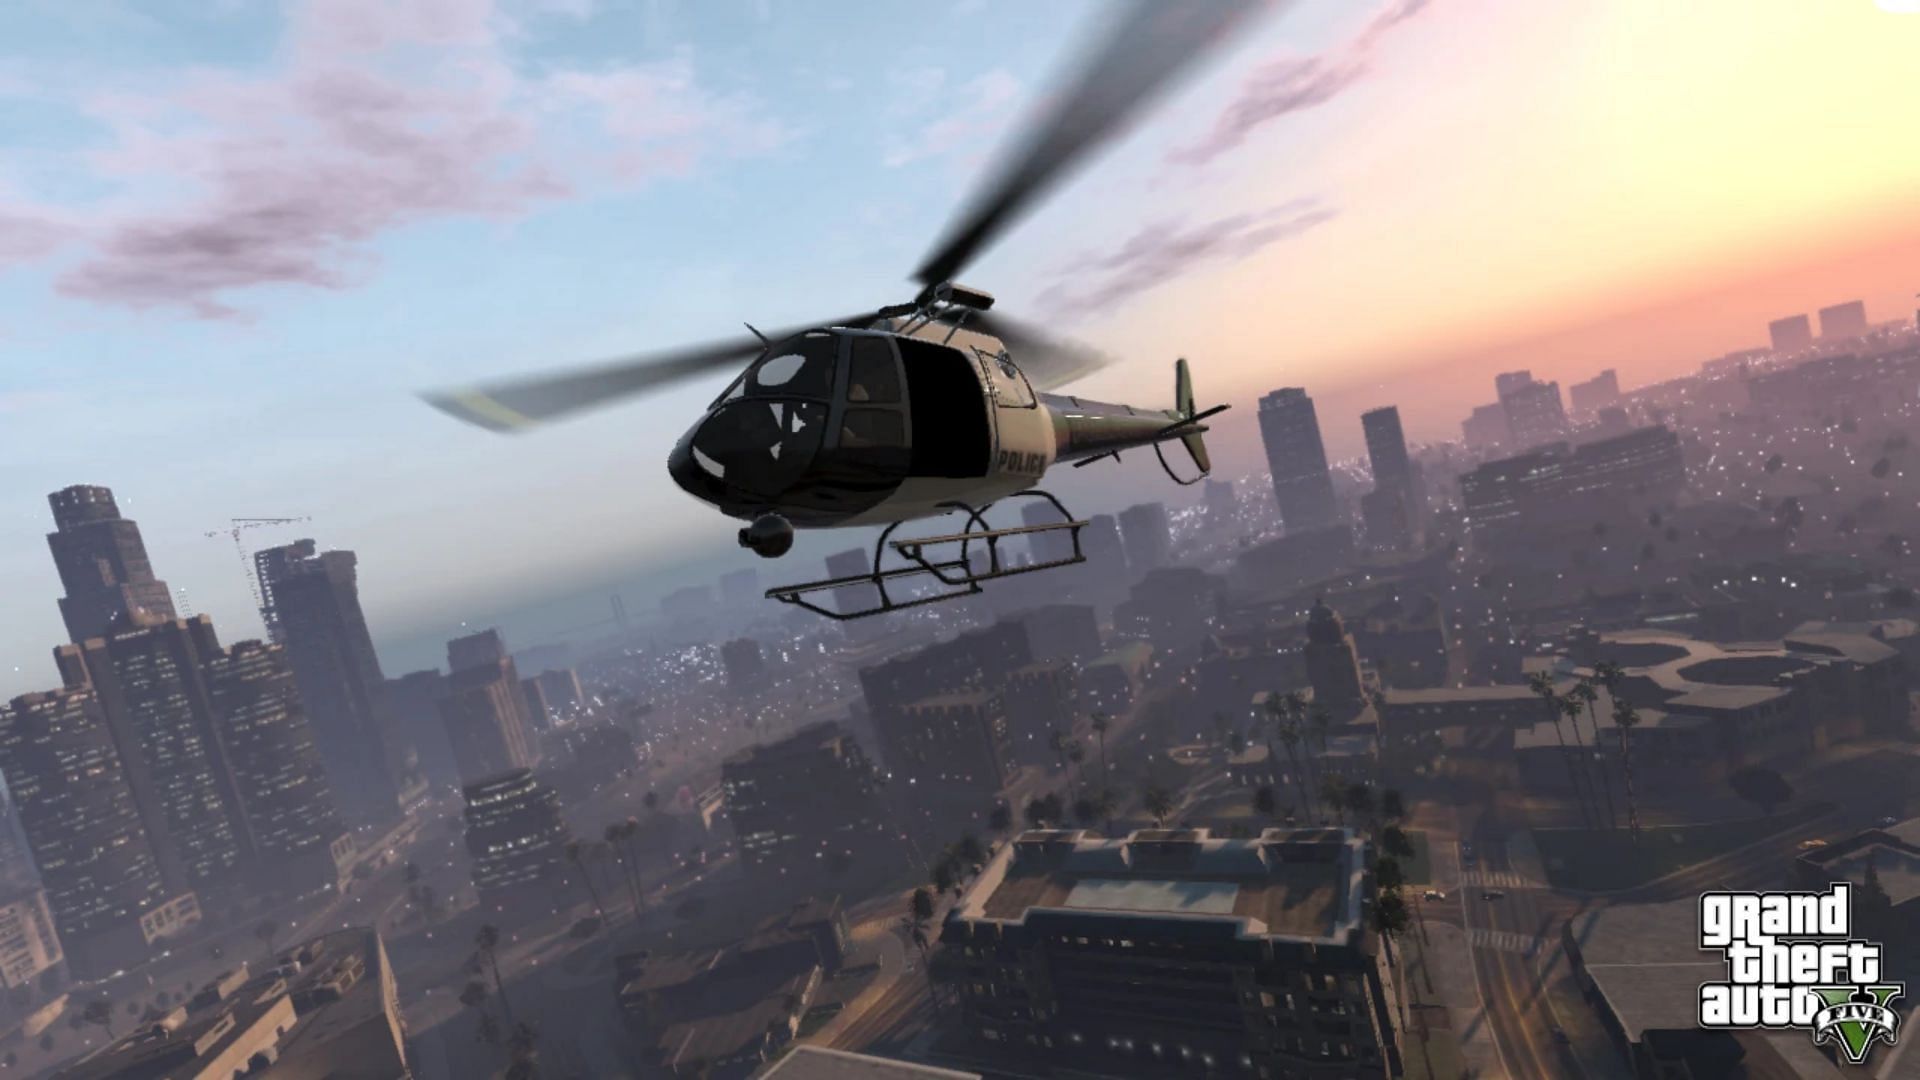 The first GTA 5 screenshots were revealed in 2012. (Image via Rockstar Games)